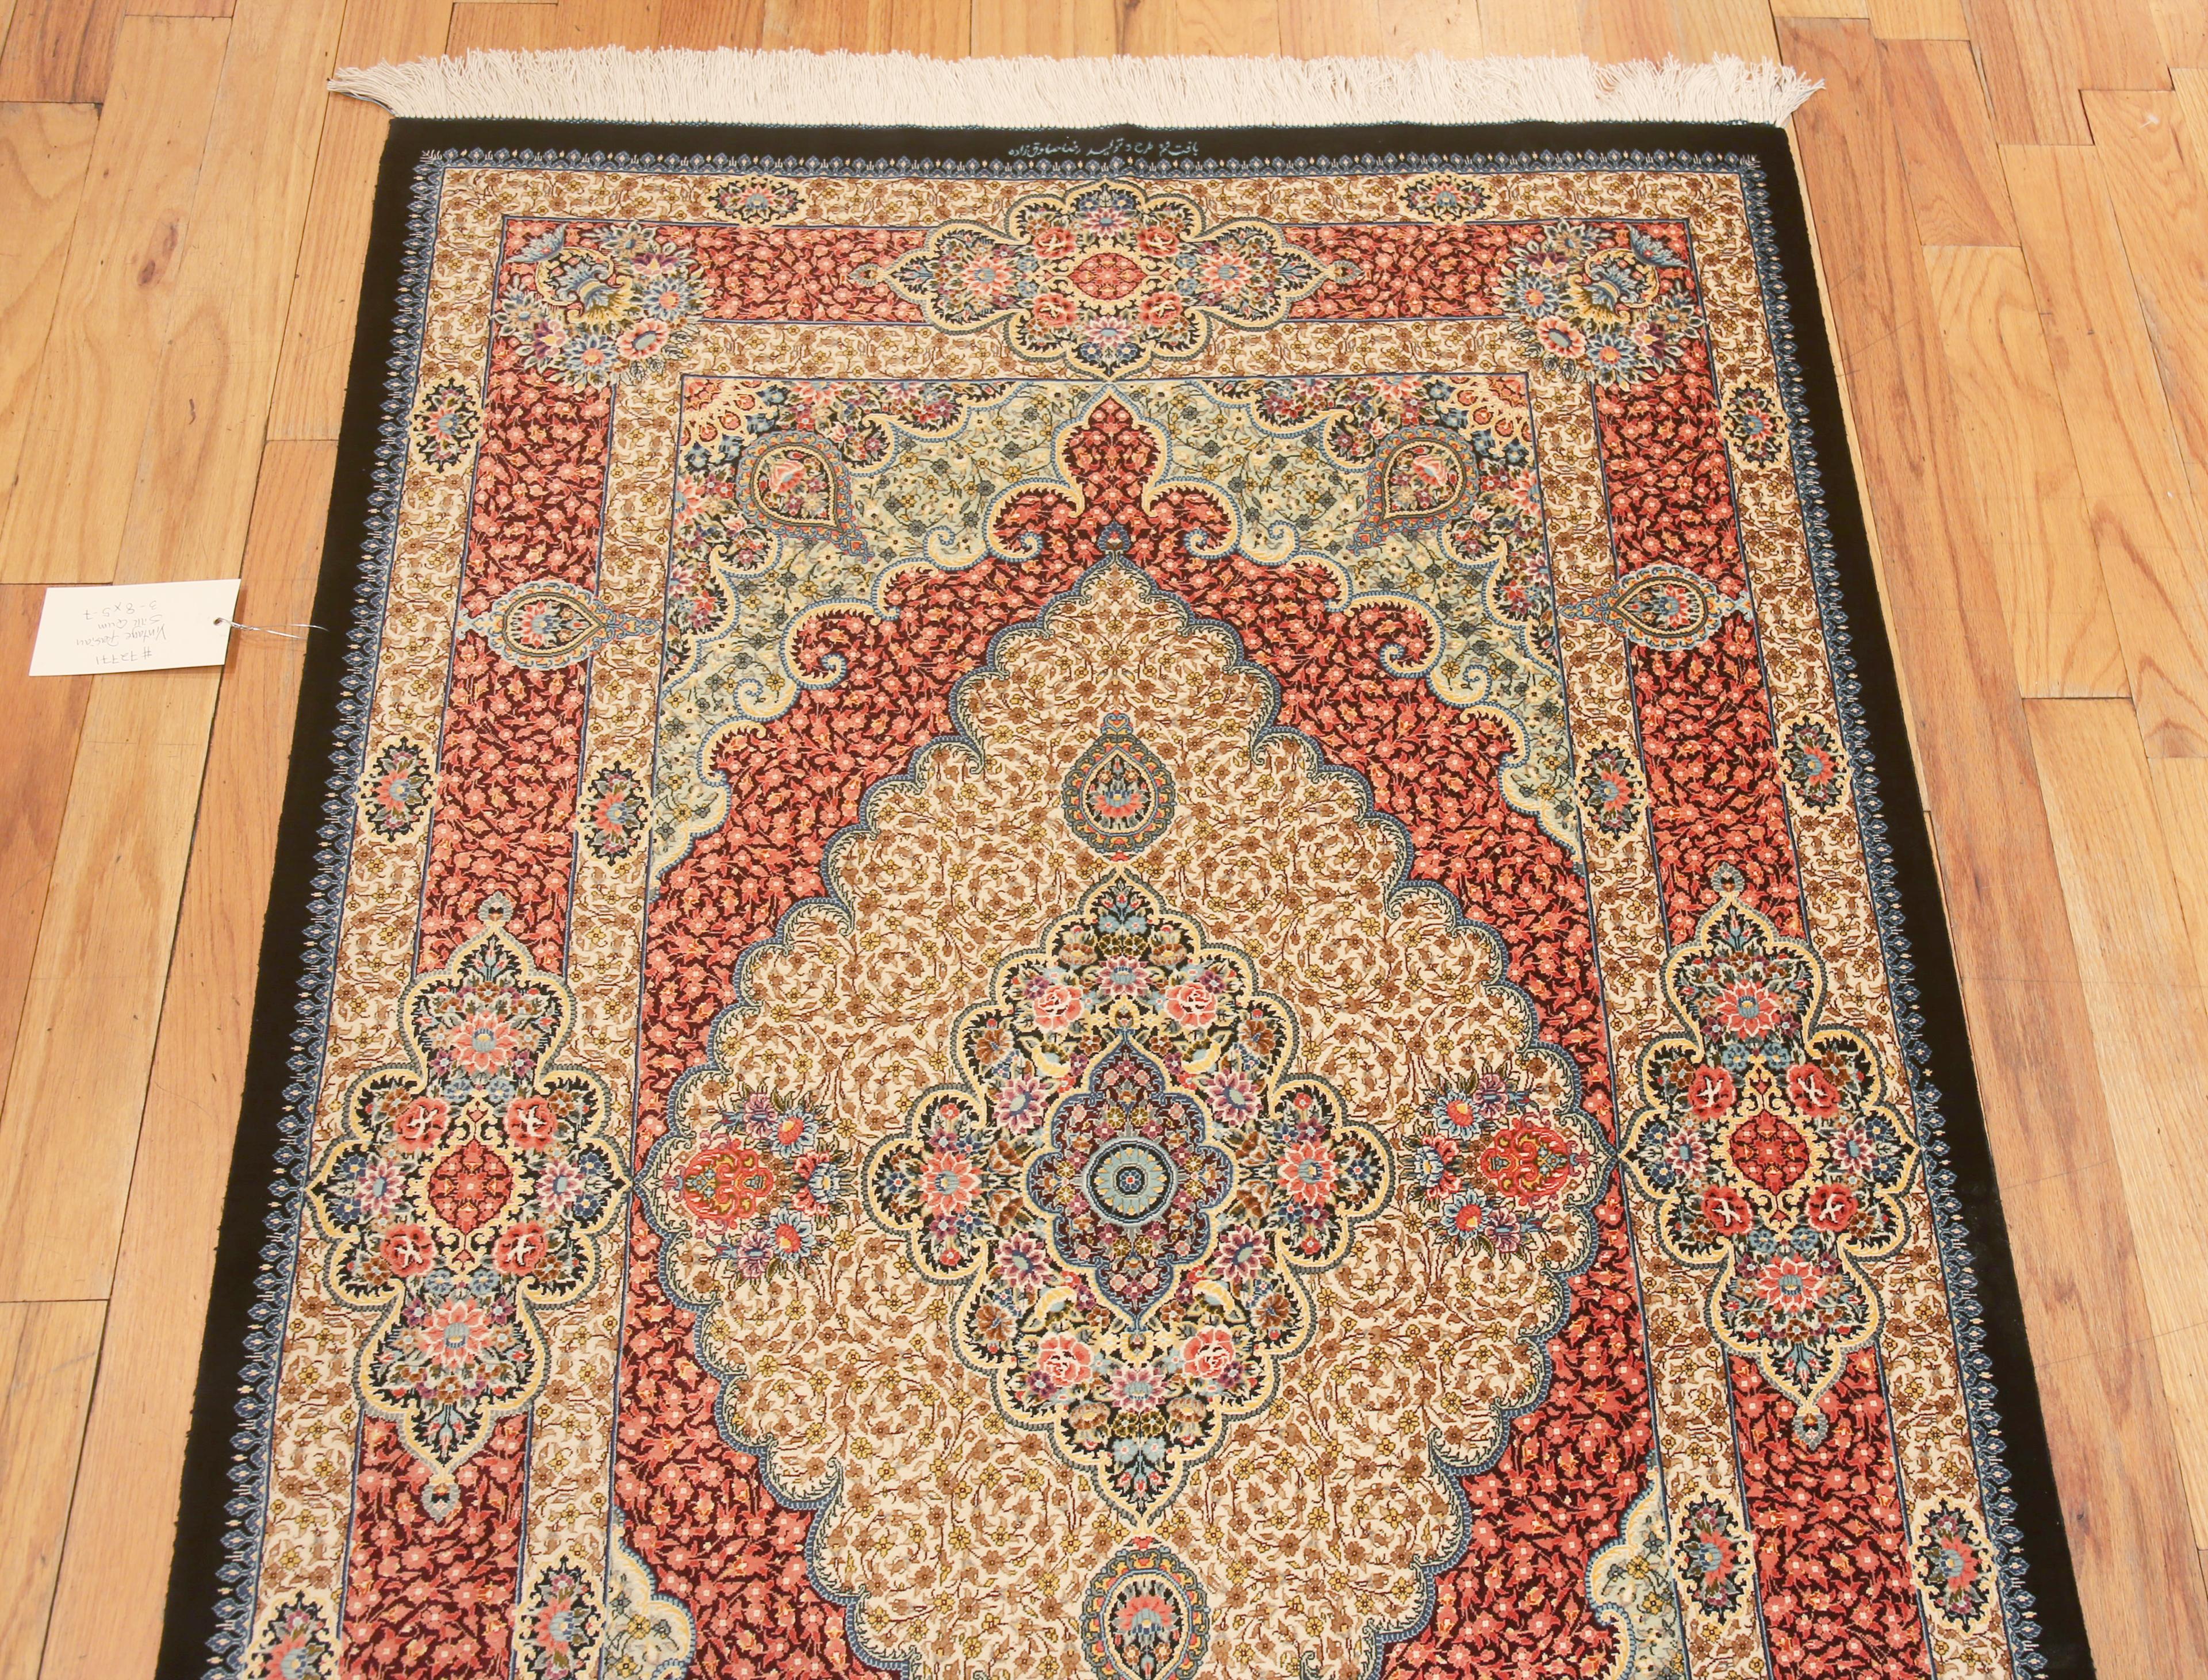 Gorgeous Small Scatter Size Fine Luxurious Floral Vintage Persian Silk Qum Rug, country of origin: Persian Rugs, Circa date: Vintage